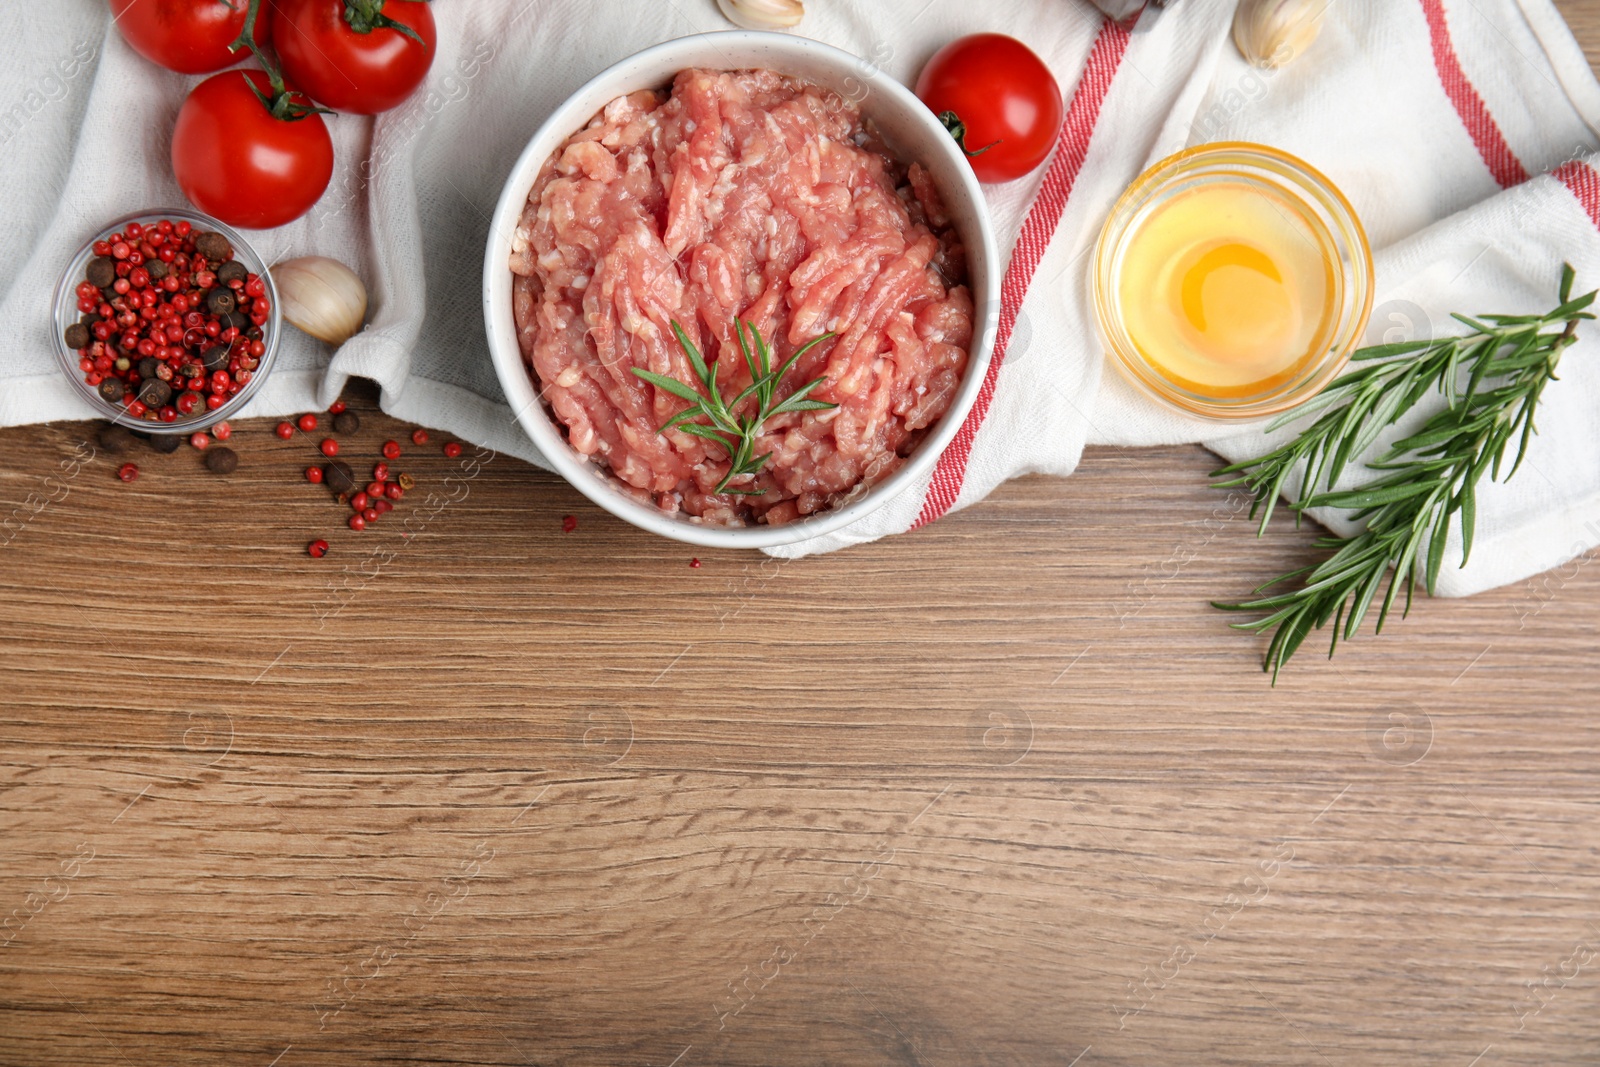 Photo of Raw chicken minced meat and ingredients on wooden table, flat lay. Space for text